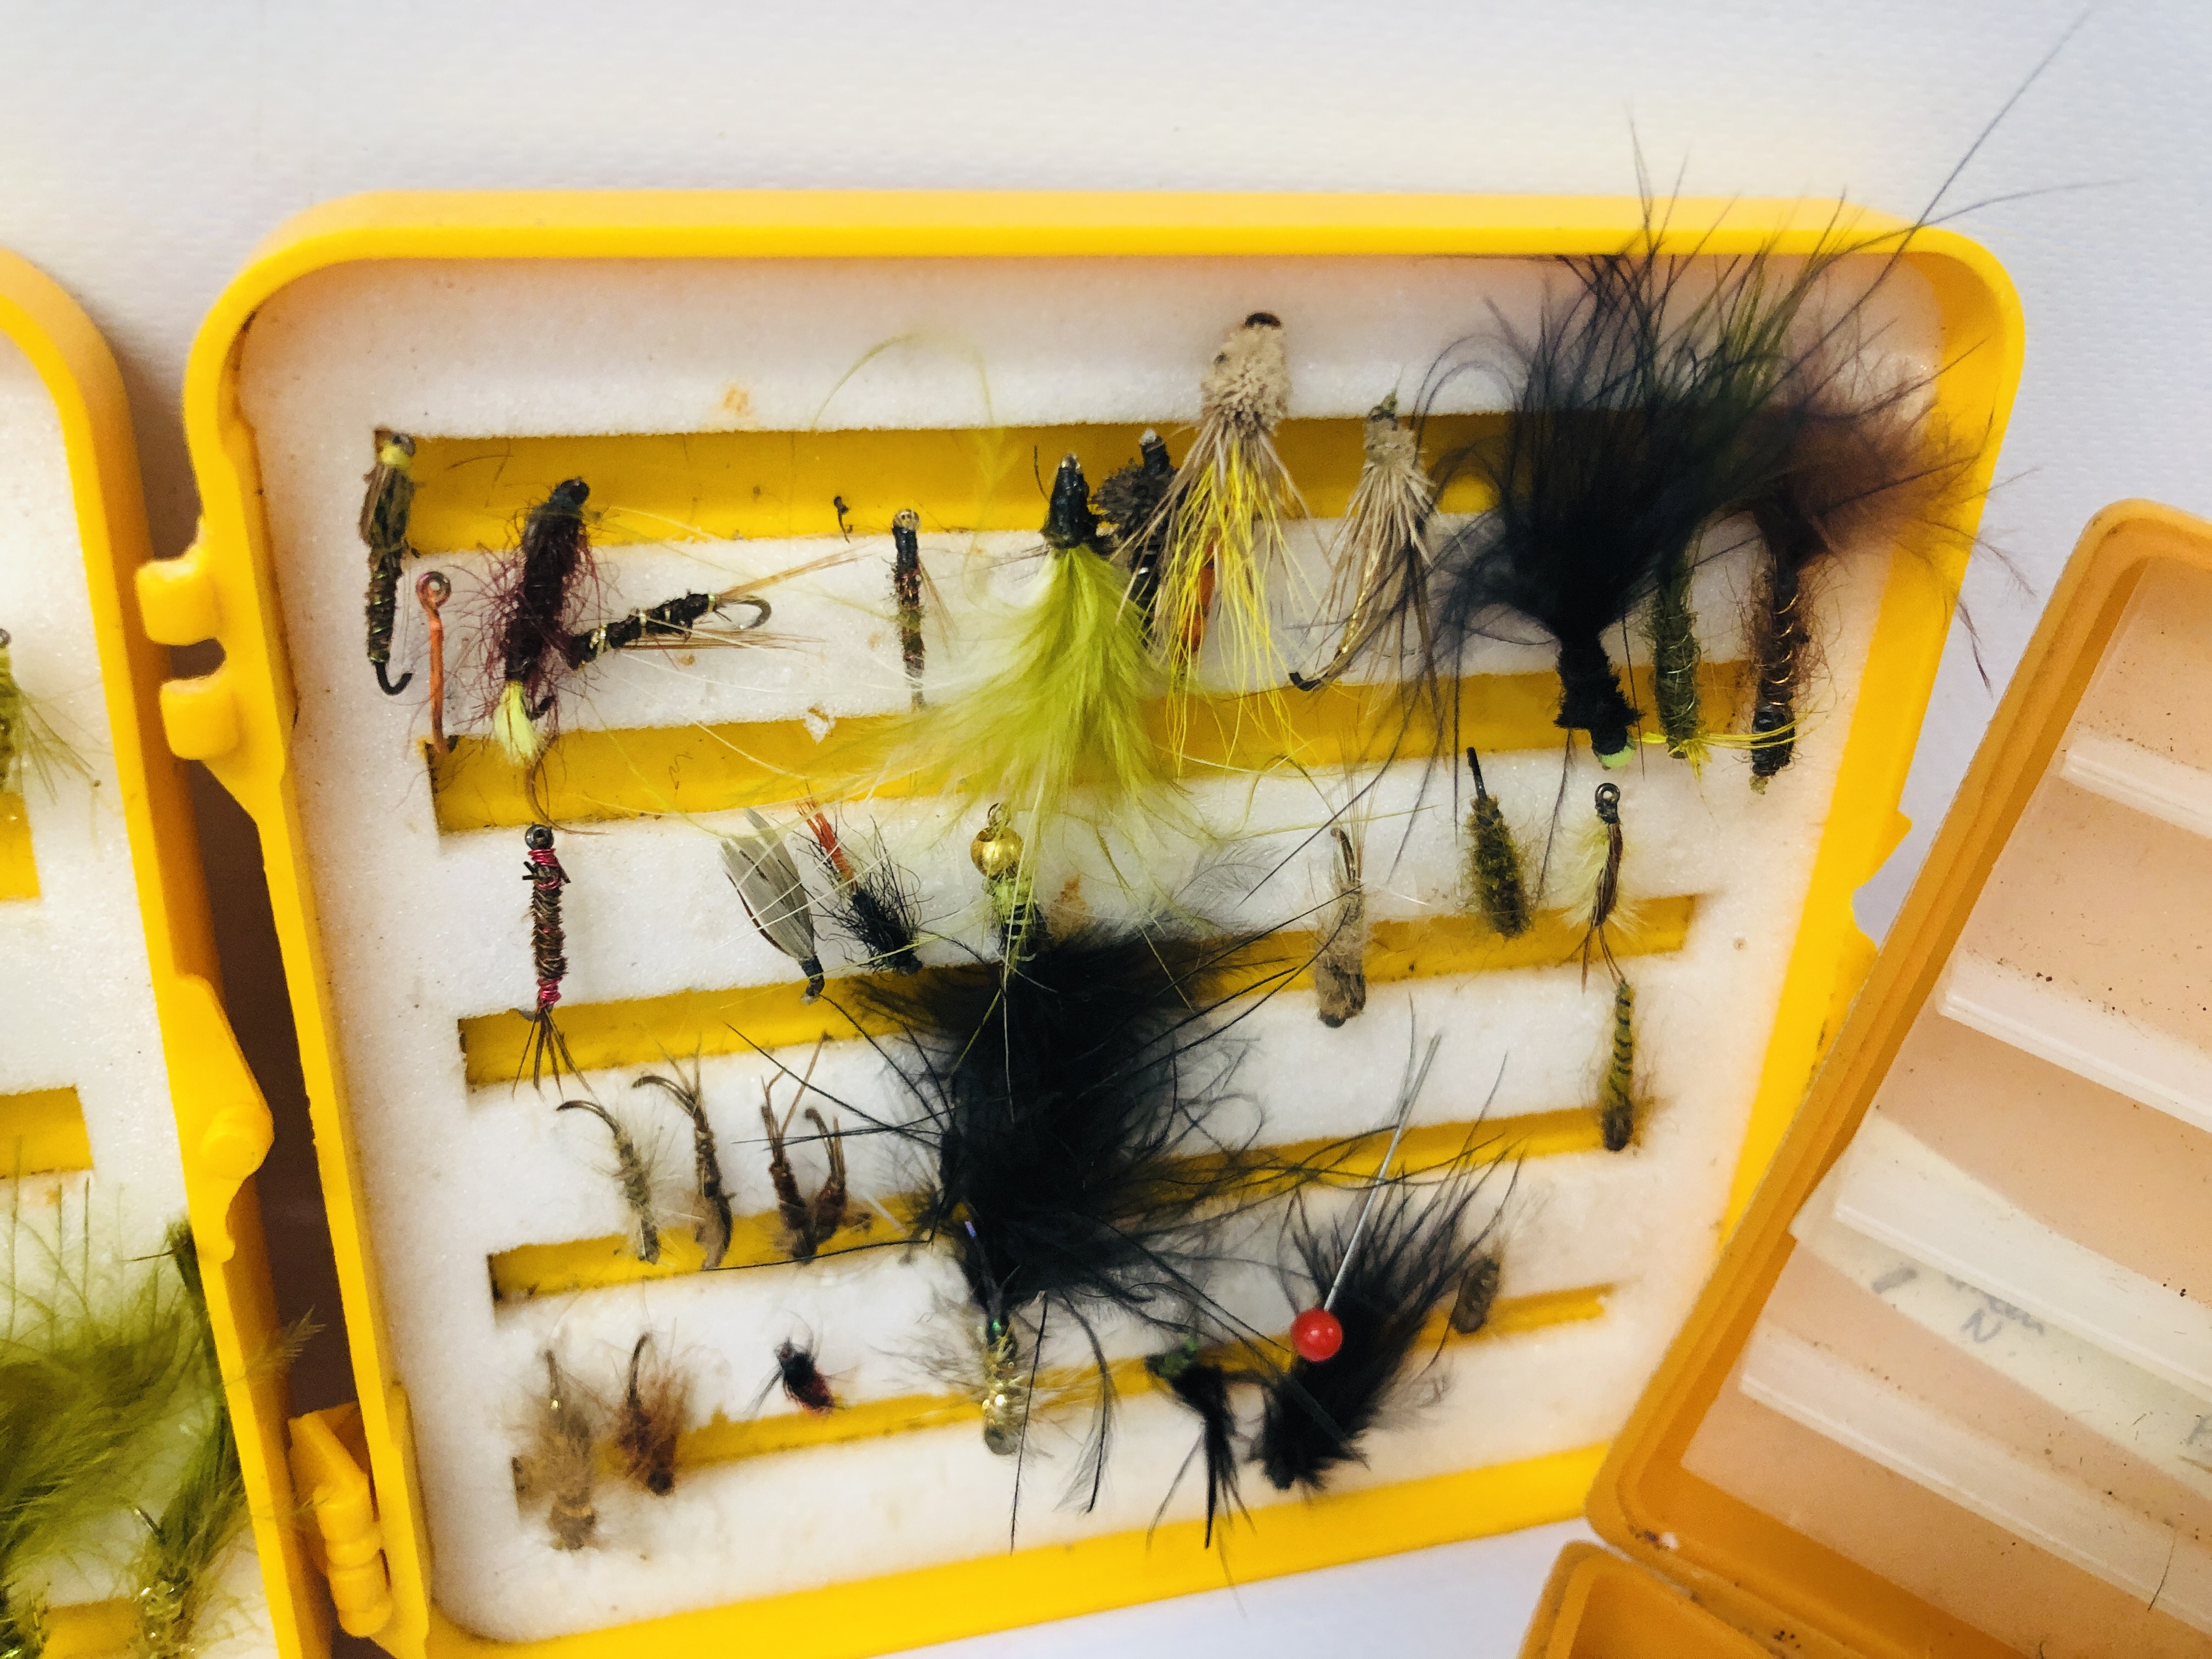 SIX CASES CONTAINING AN ASSORTMENT OF FISHING FLIES. - Image 5 of 9